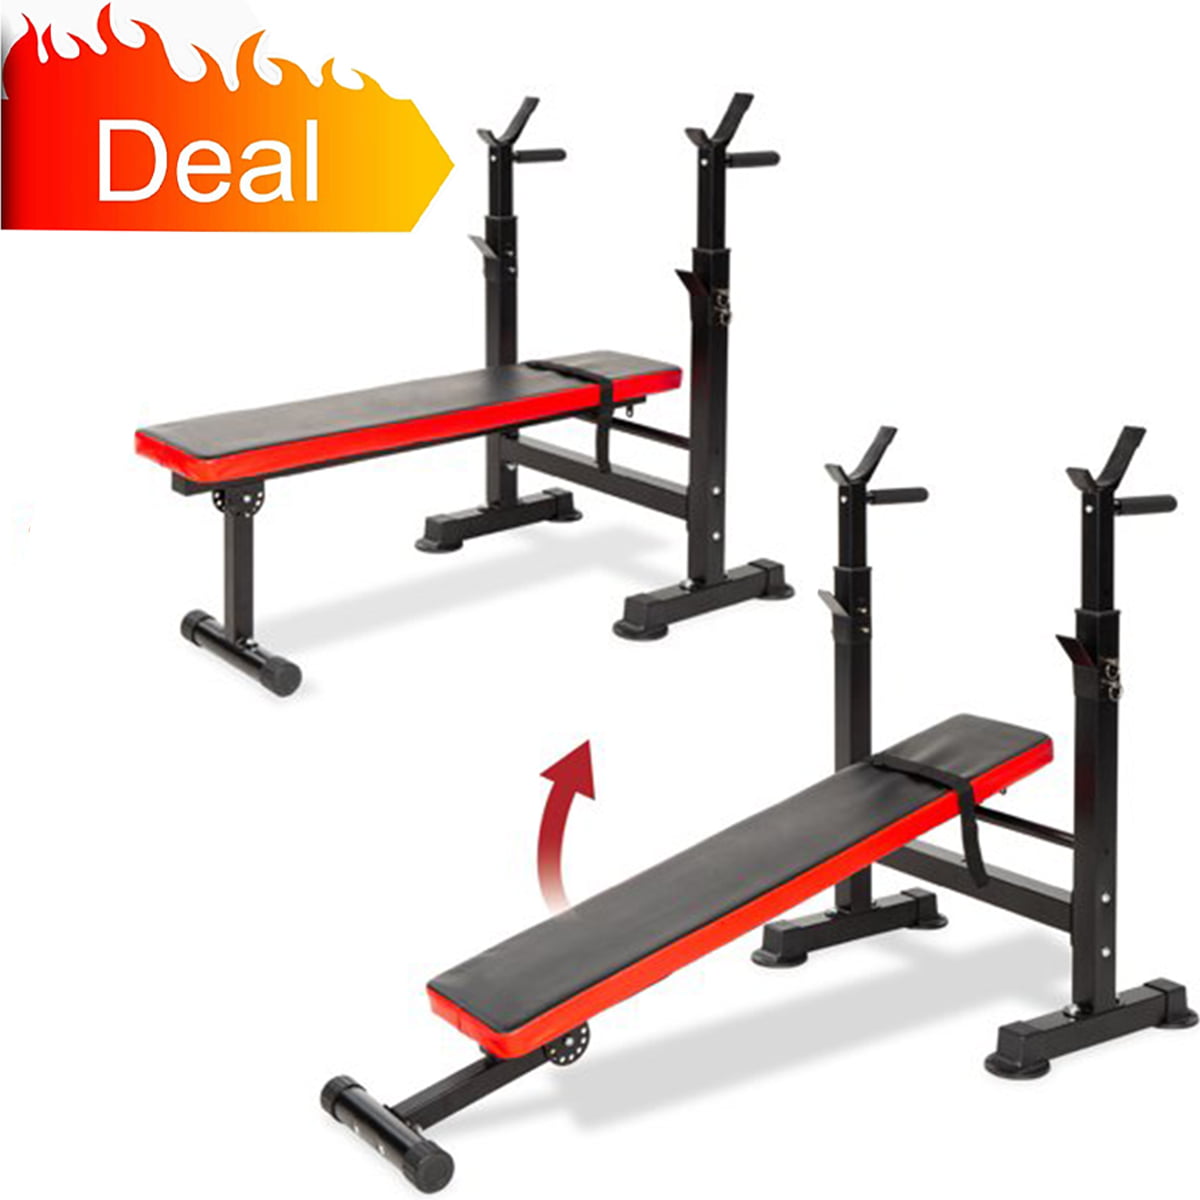 Weight Bench Set Adjustable Home Gym Press Lifting Barbell Exercise Workout Hot 